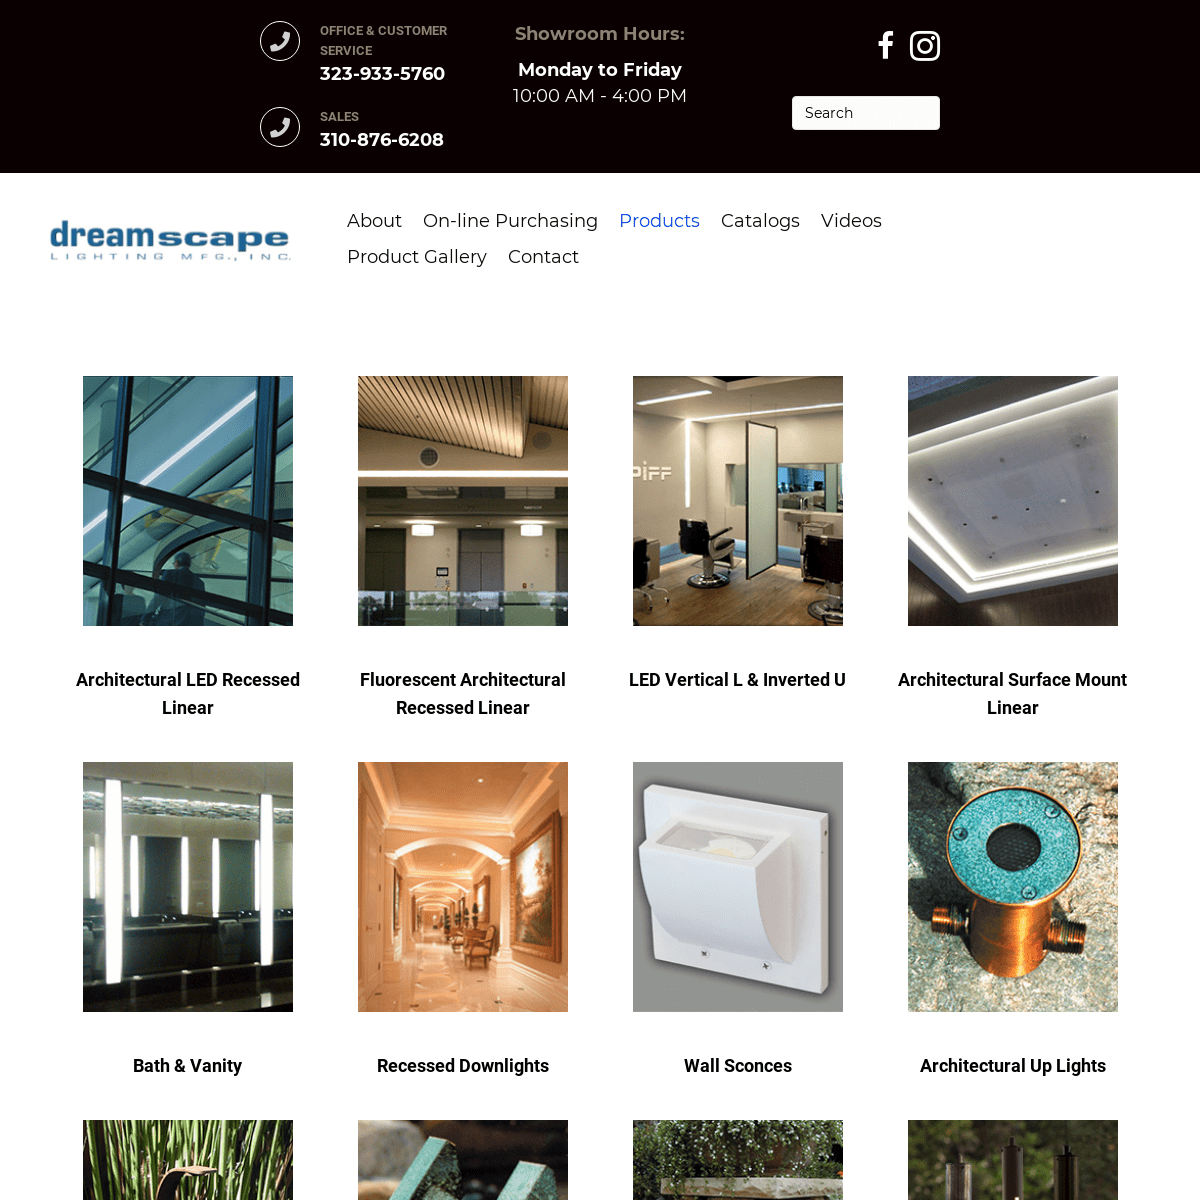 A complete backup of https://dreamscapelighting.com